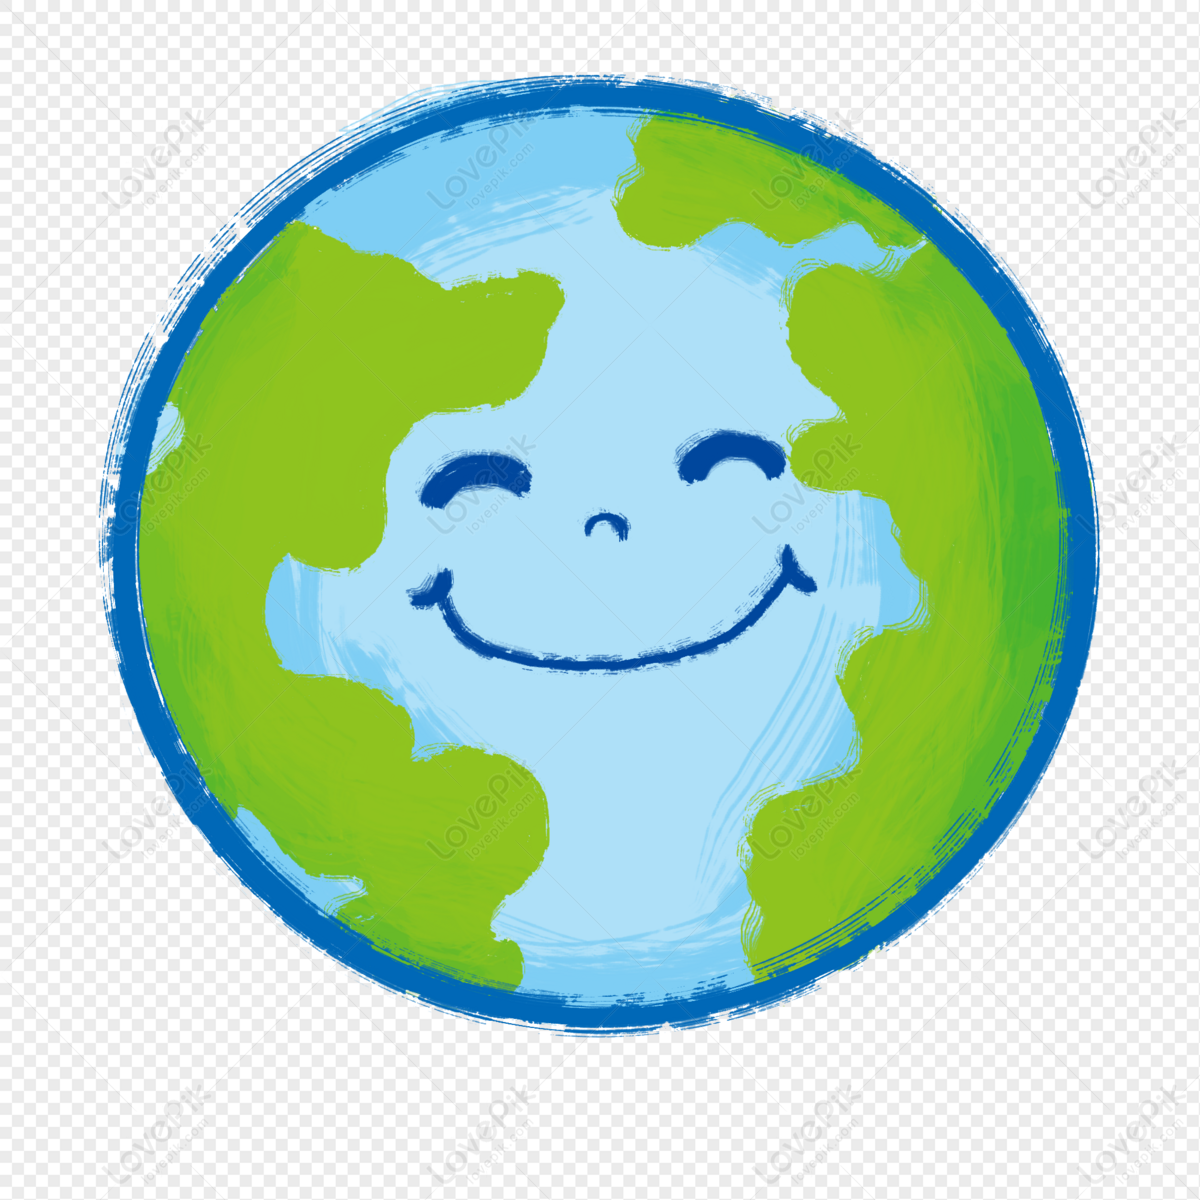 Earth Earth Happy Earth Globe Earth Green PNG White Transparent And